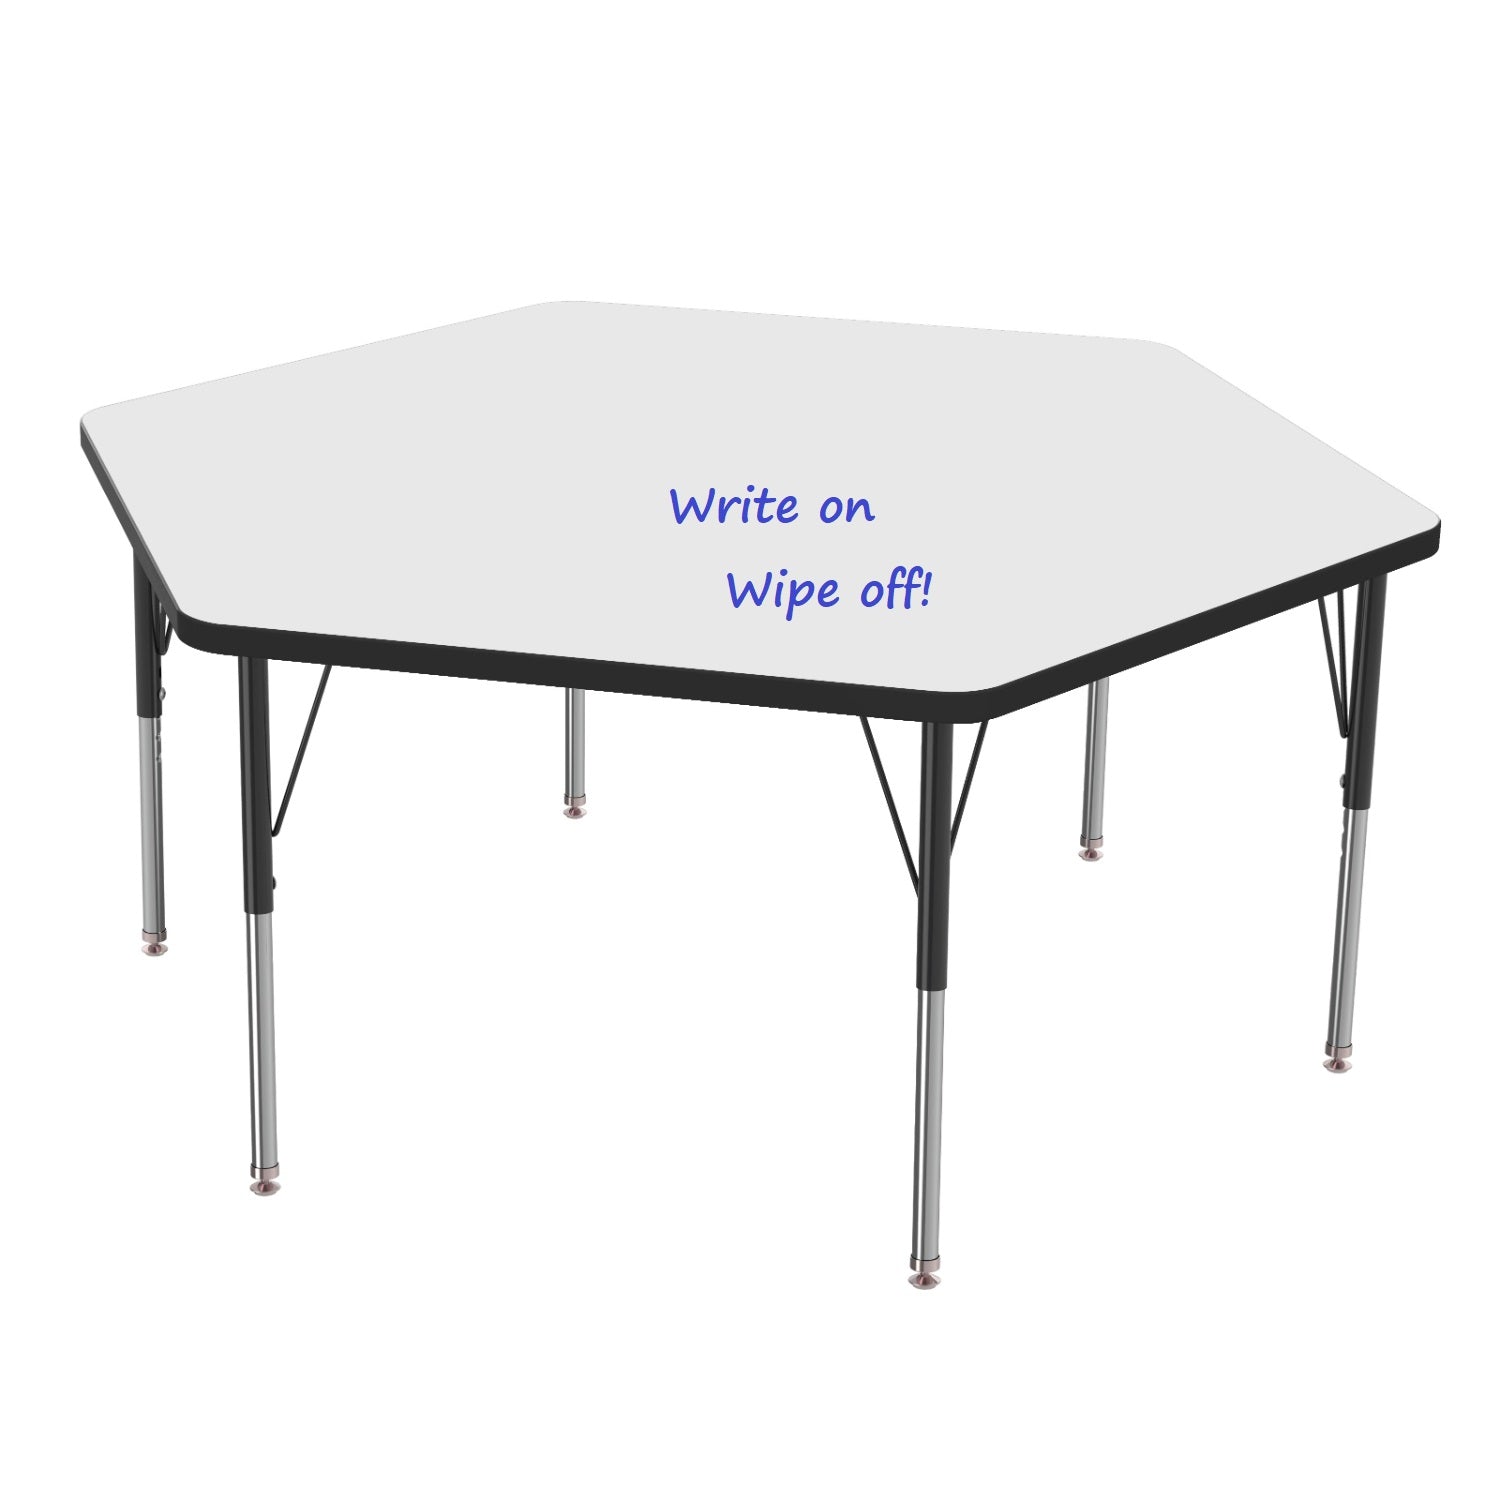 MG Series Adjustable Height Activity Table with White Dry Erase Markerboard Top, 54.5" x 48" Hexagon